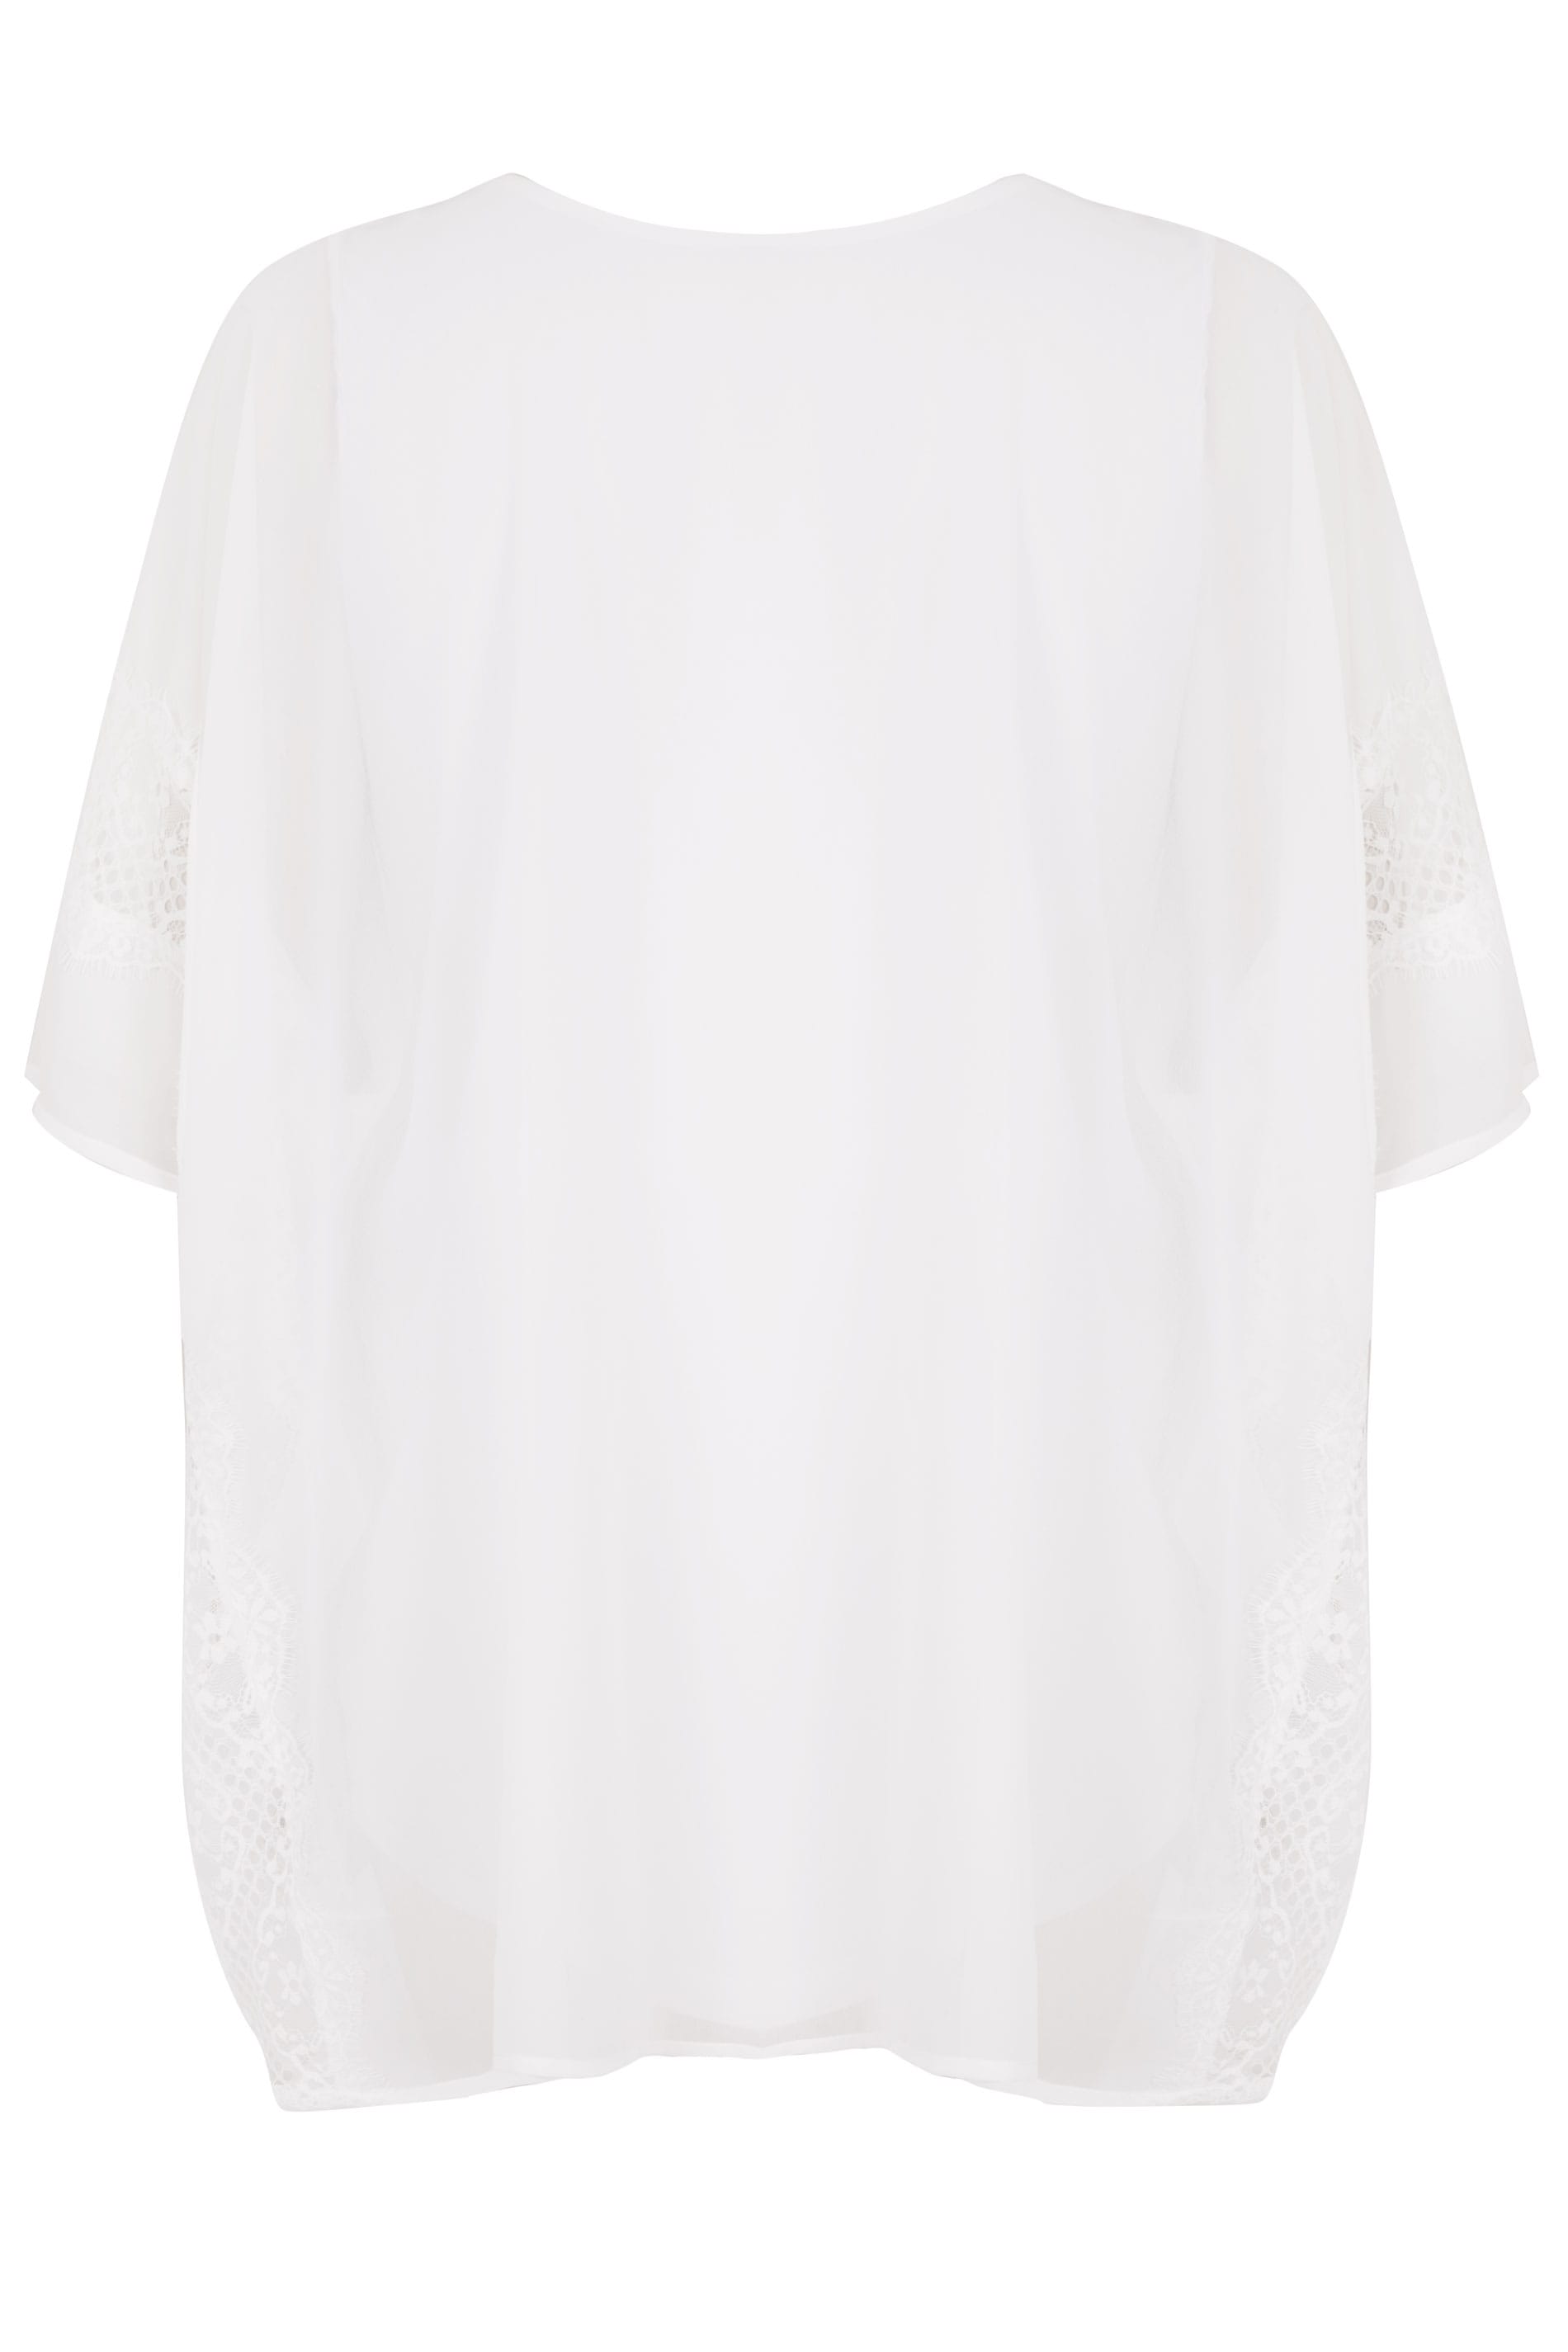 Yours London Witte Chiffon Shirtblouse Inclusief Ketting -6286